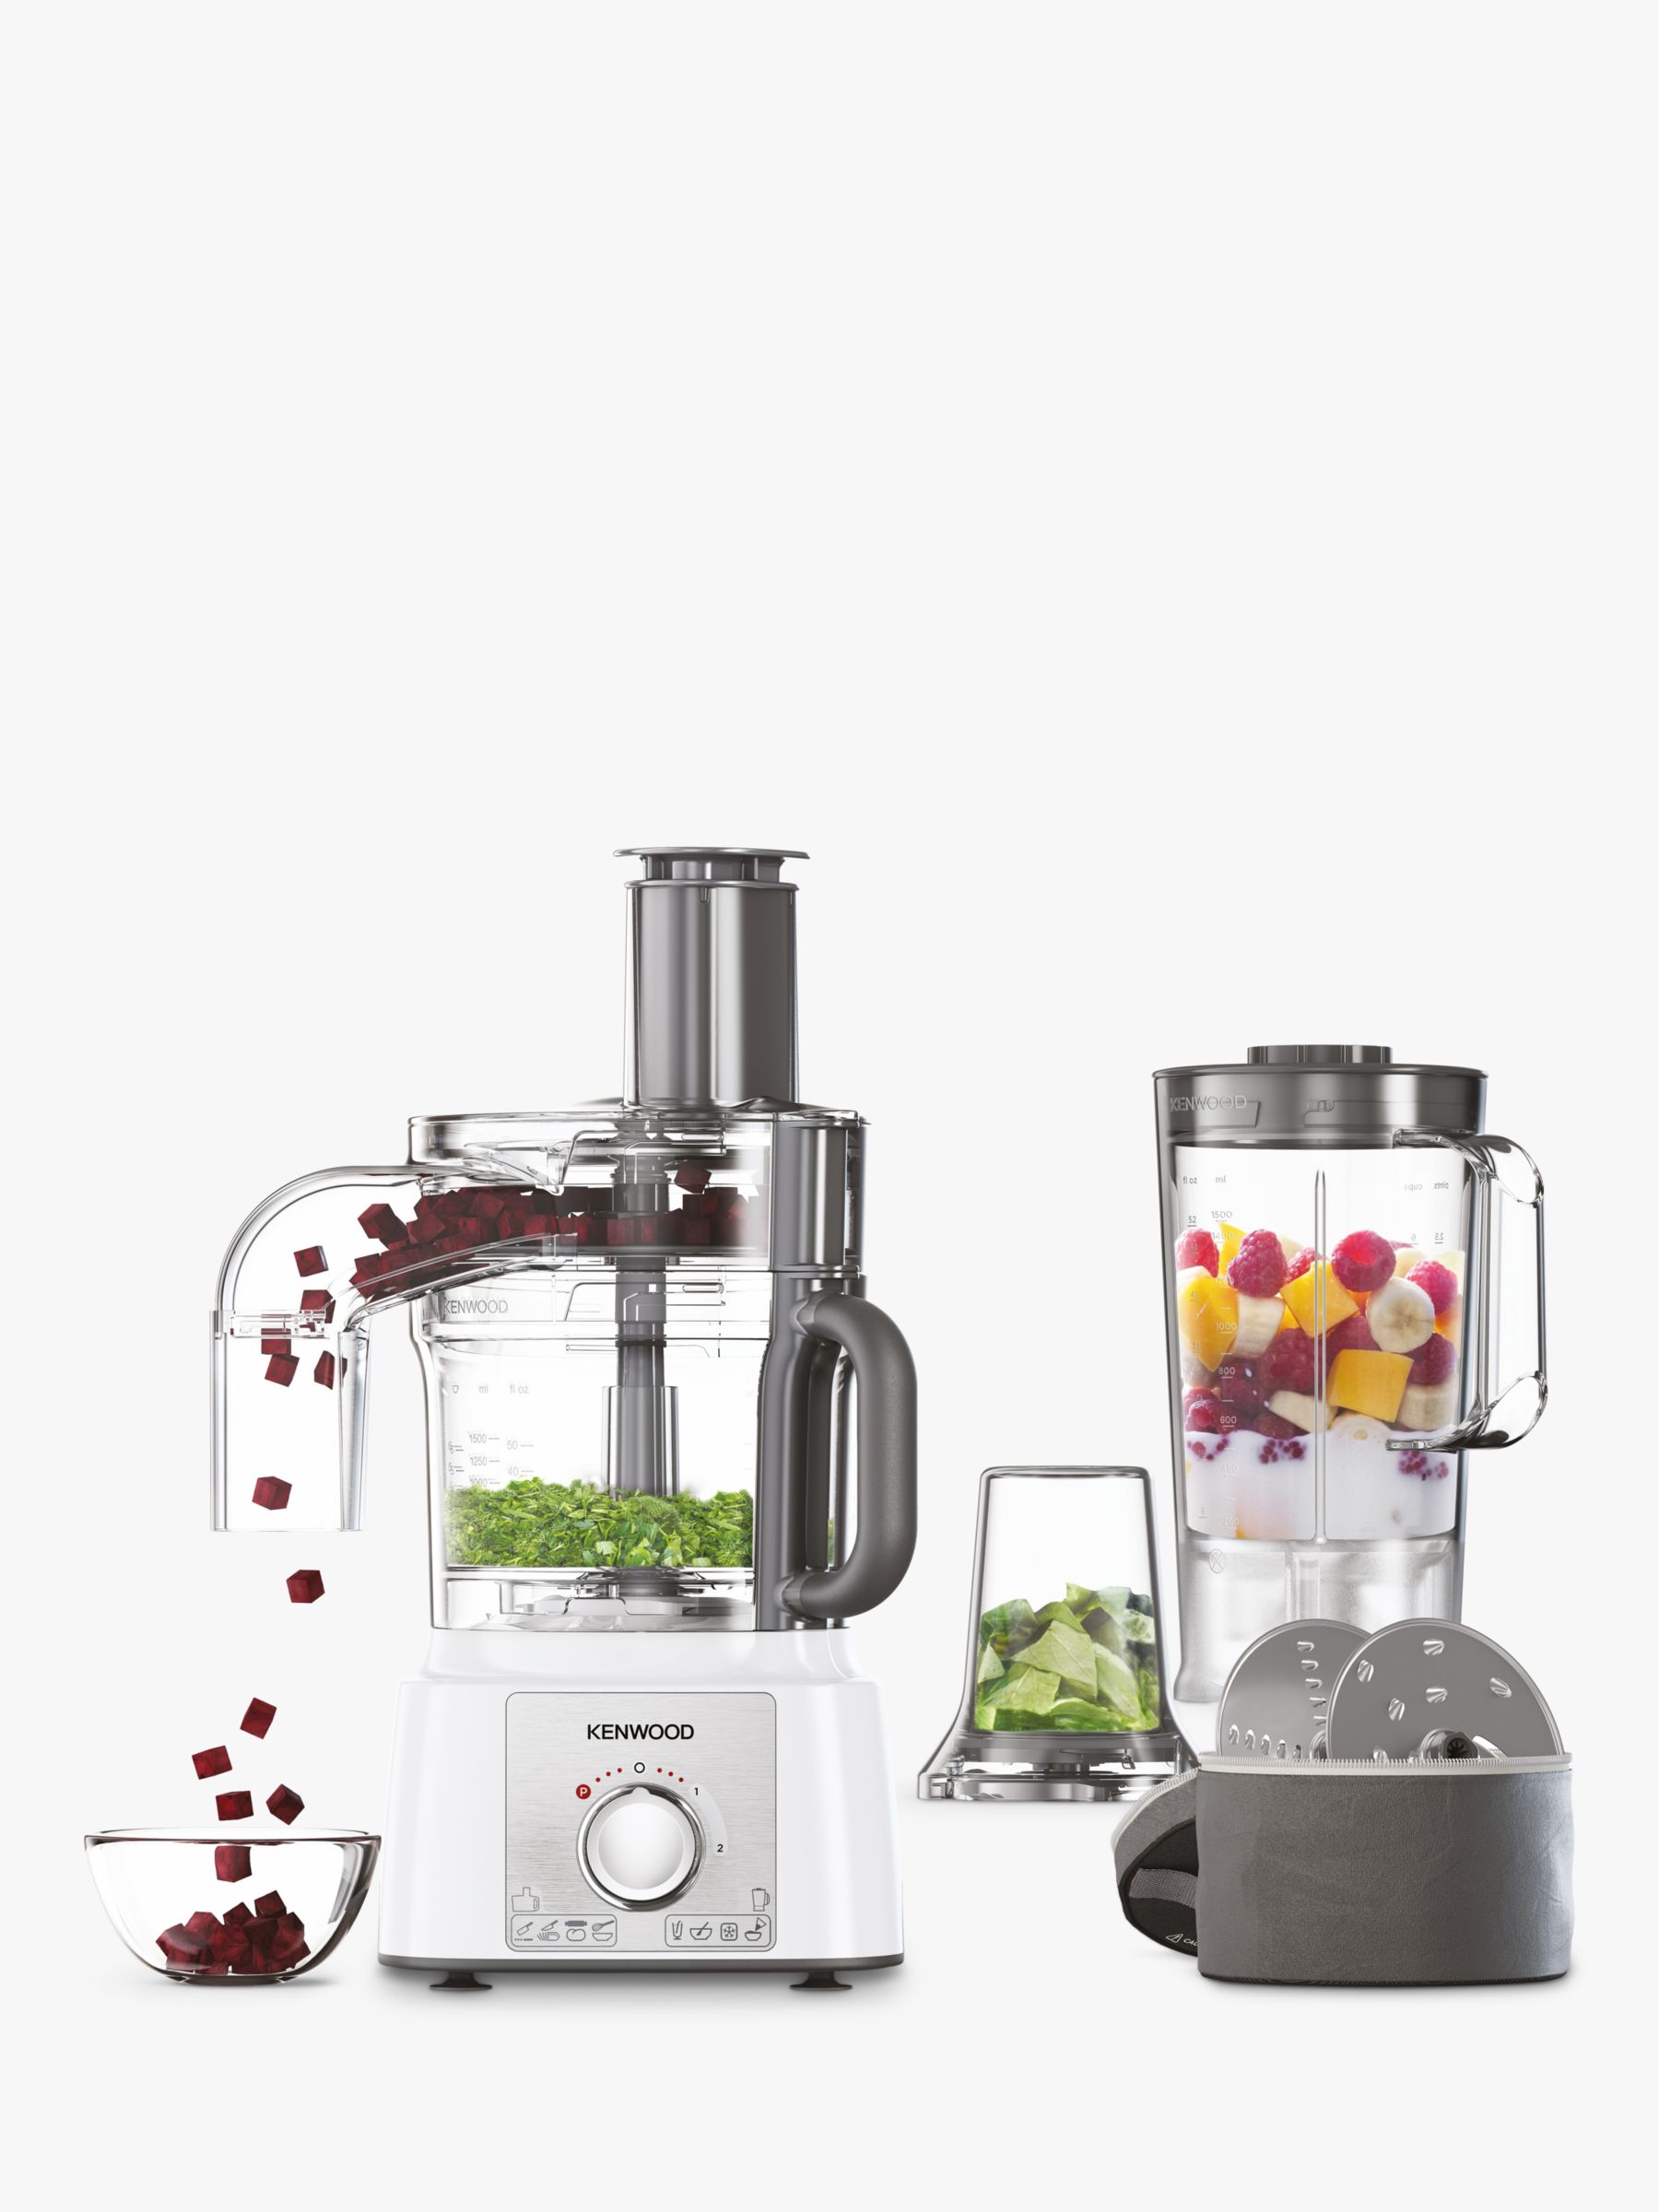 Kenwood FDP65.860WH Multipro Express 4-in-1 Food Processor, White